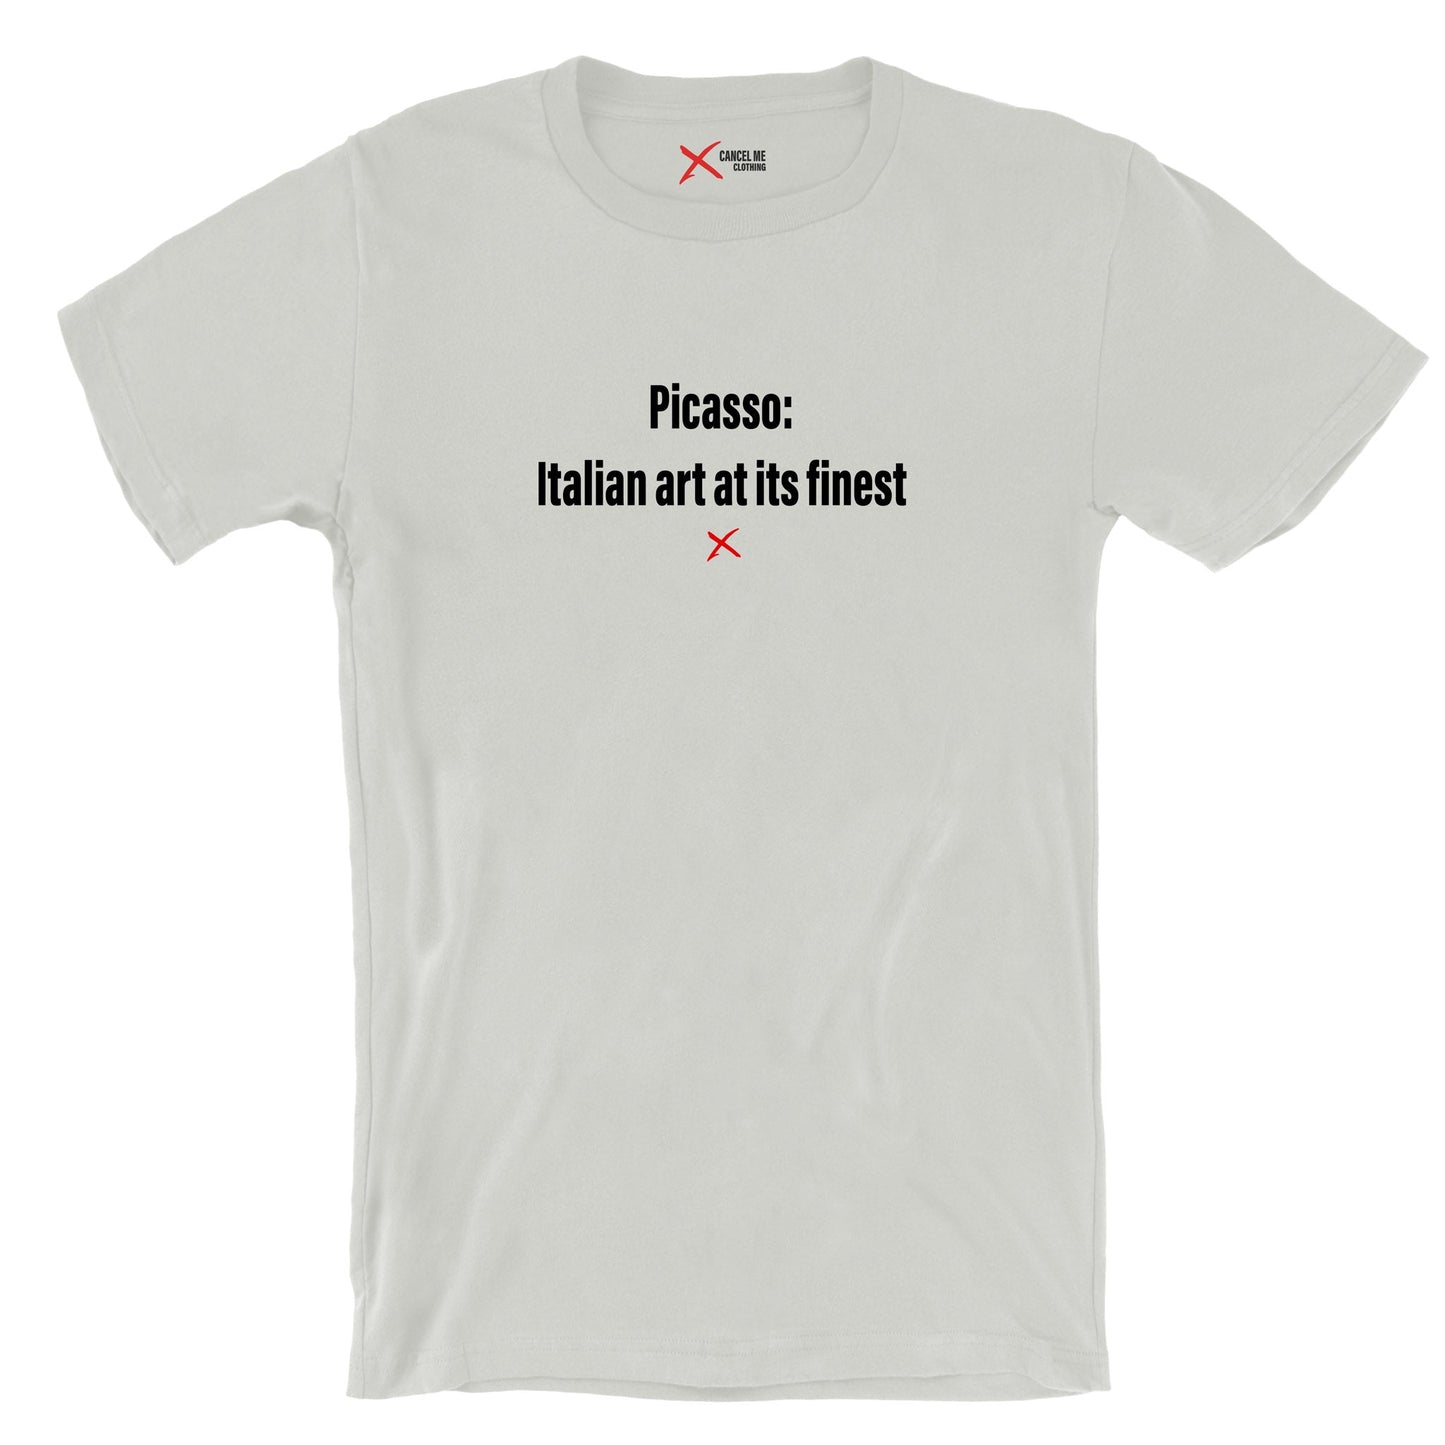 Picasso: Italian art at its finest - Shirt